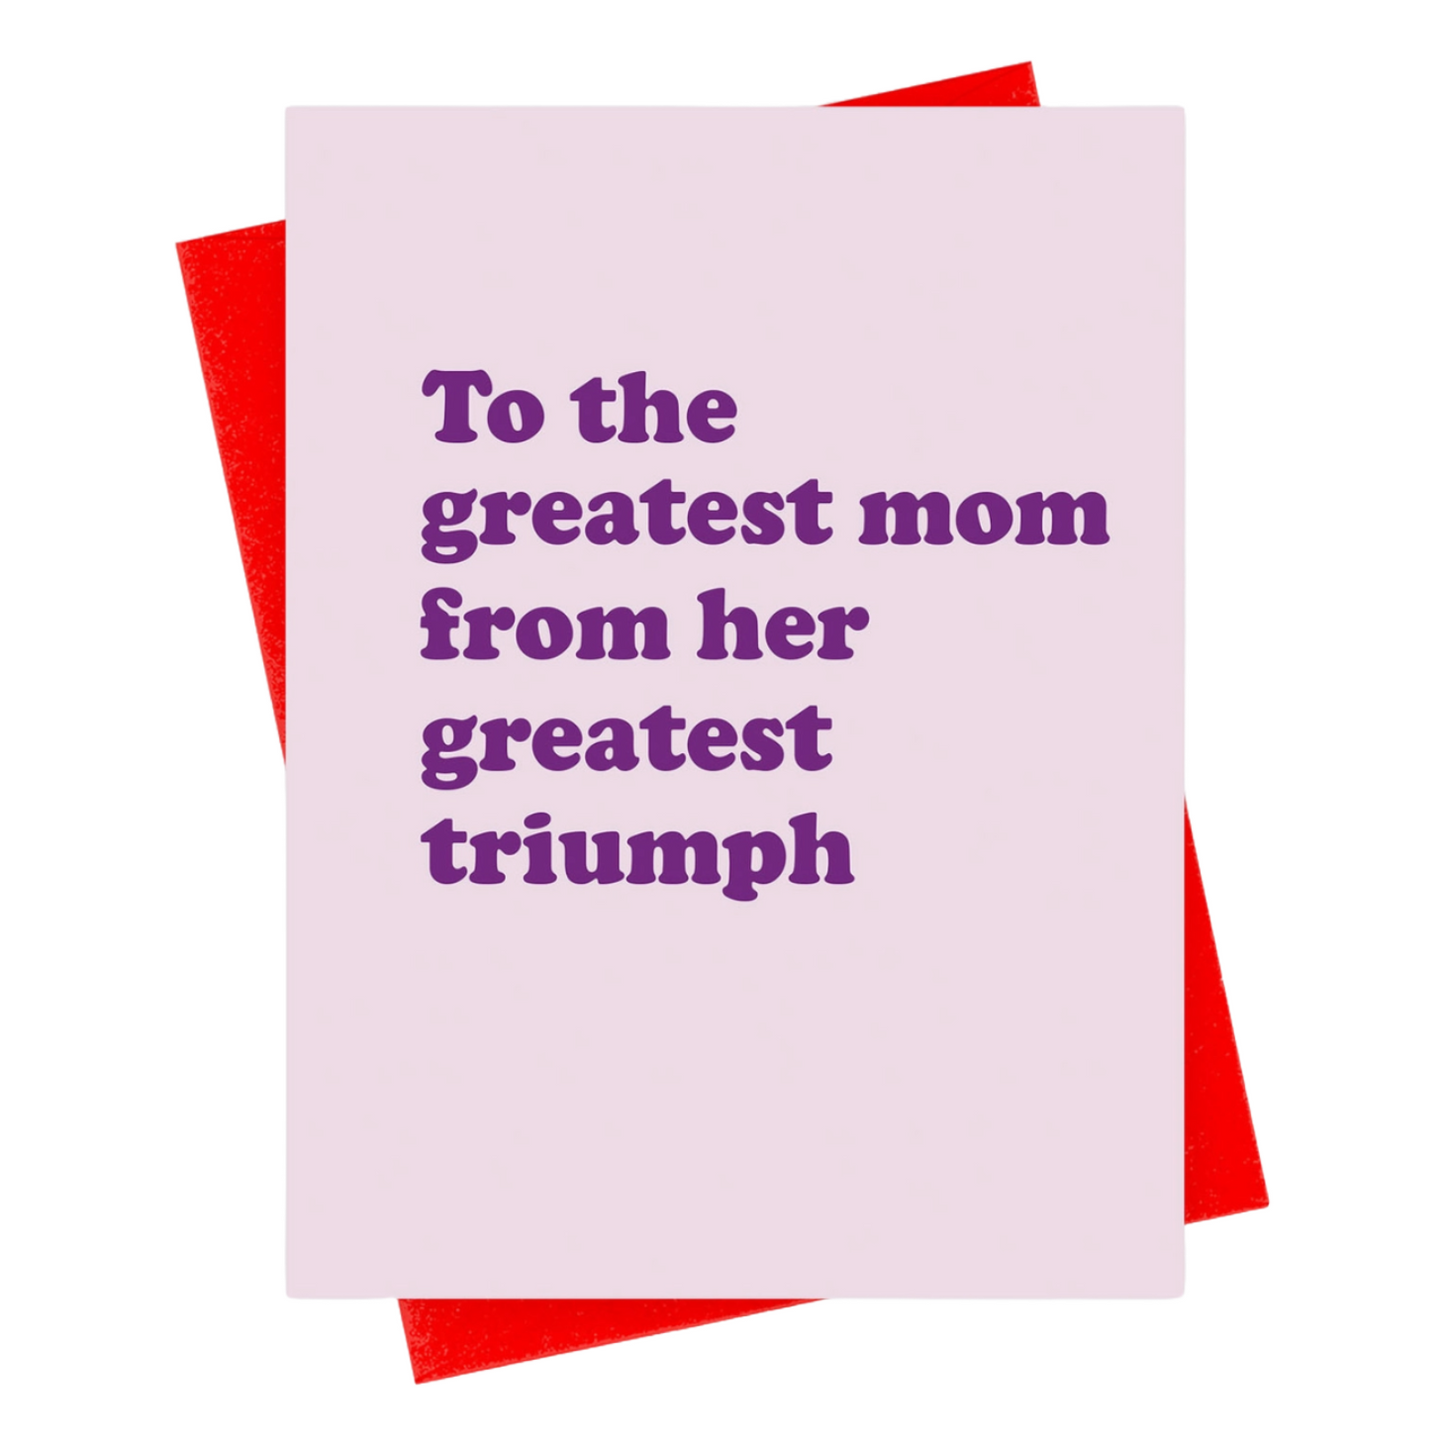 Triumph Mother's Day Card by xou